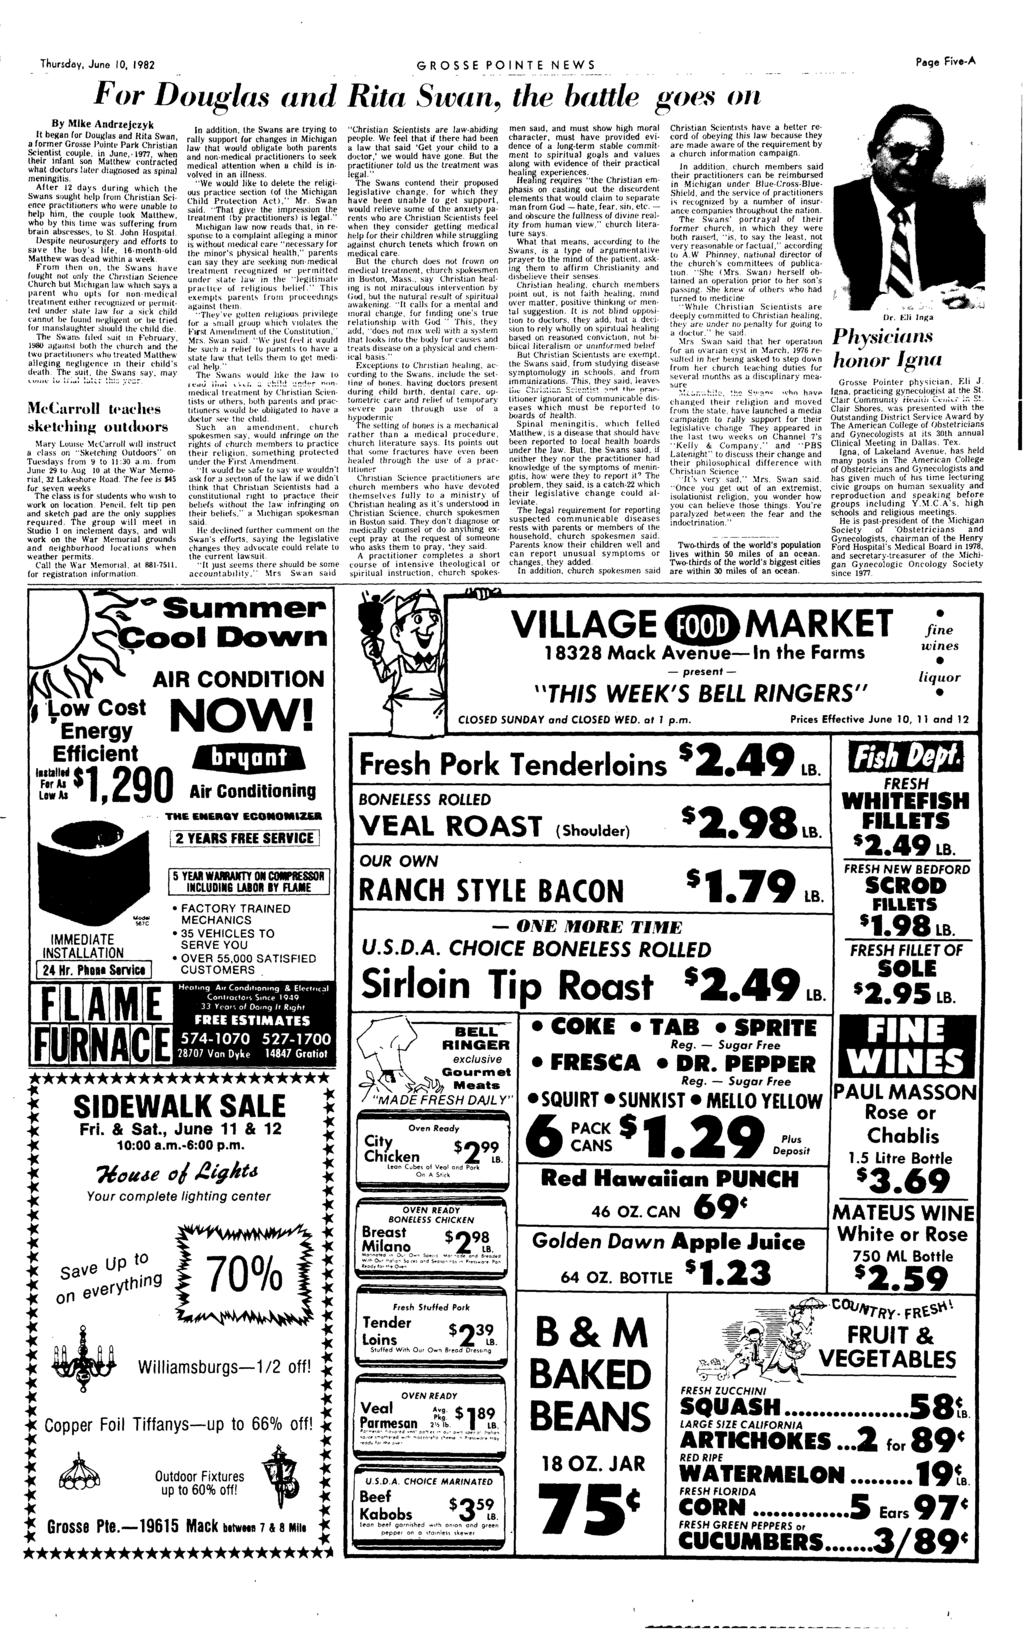 Thursday June 10 1982 GROSSE PONTE NEWS For Douglas and Rita Swan against them "They've gotten relgious privilege for a mall group which VOlates the Fltst Amellllment uf the Cunstitution" Mrs Swan